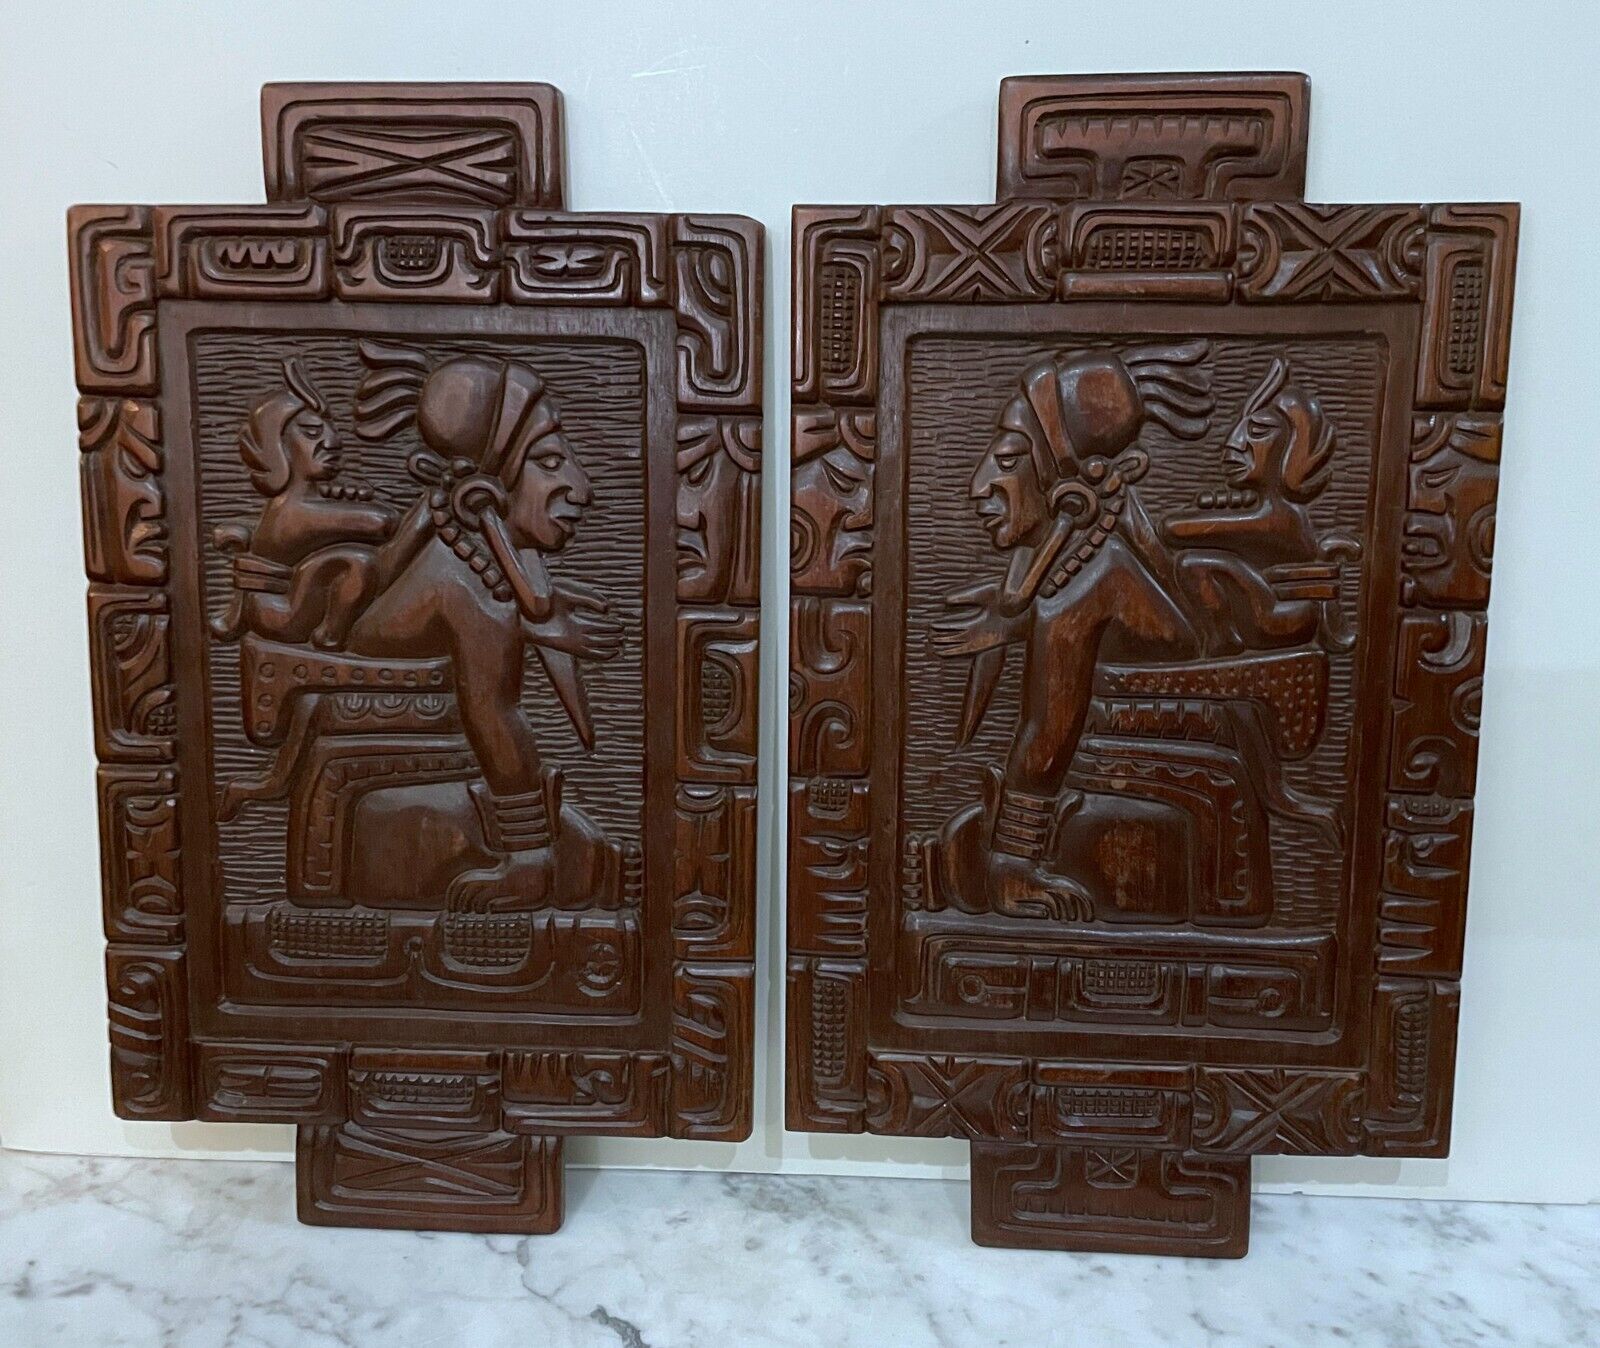 GORGEOUS PAIR OF SIGNED VINTAGE MAYAN STYLE CARVED WOOD PANELS FROM HONDURAS